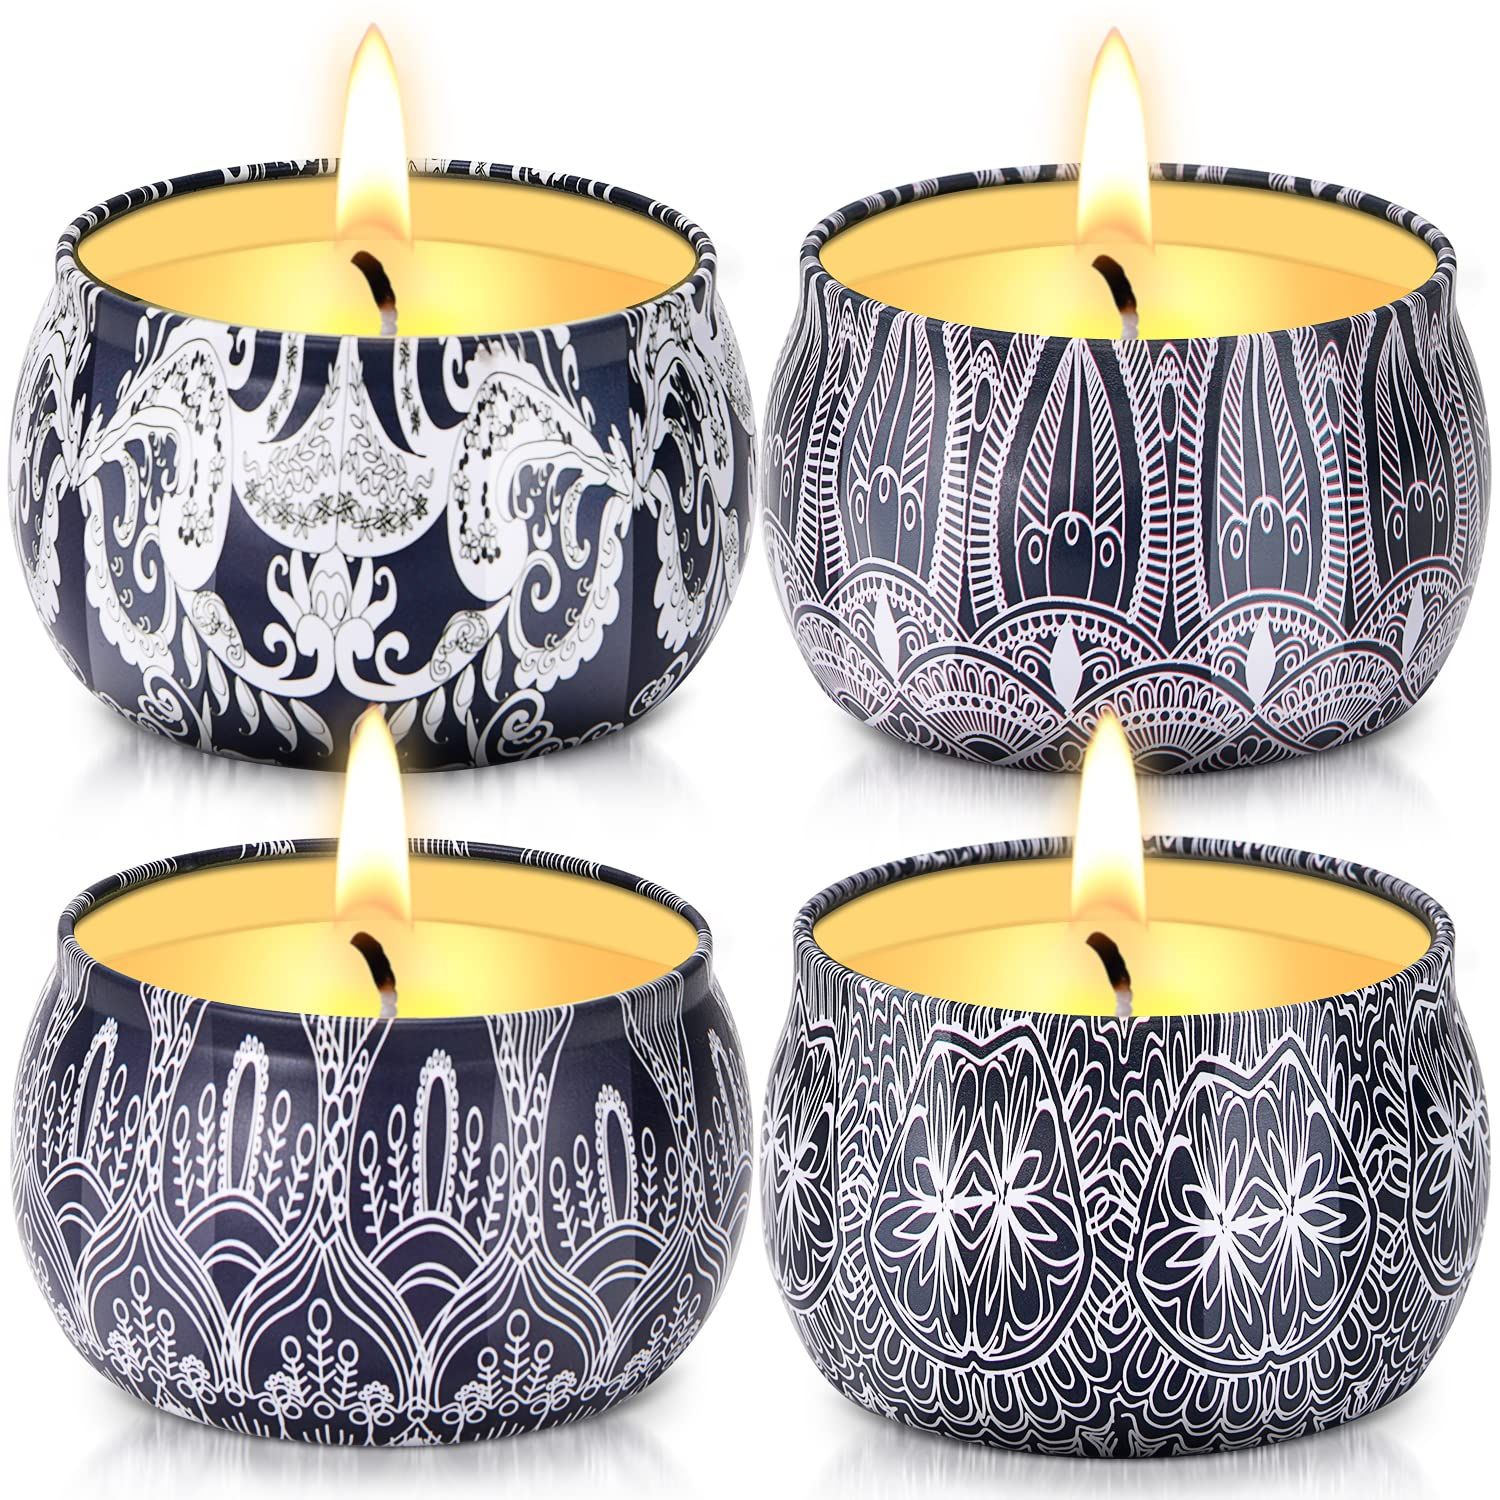 Hausware Citronella Candles - 4 Pack Citronella Candles Outdoor Set，Indoor Scented Soy Wax Candles P | Amazon (US)